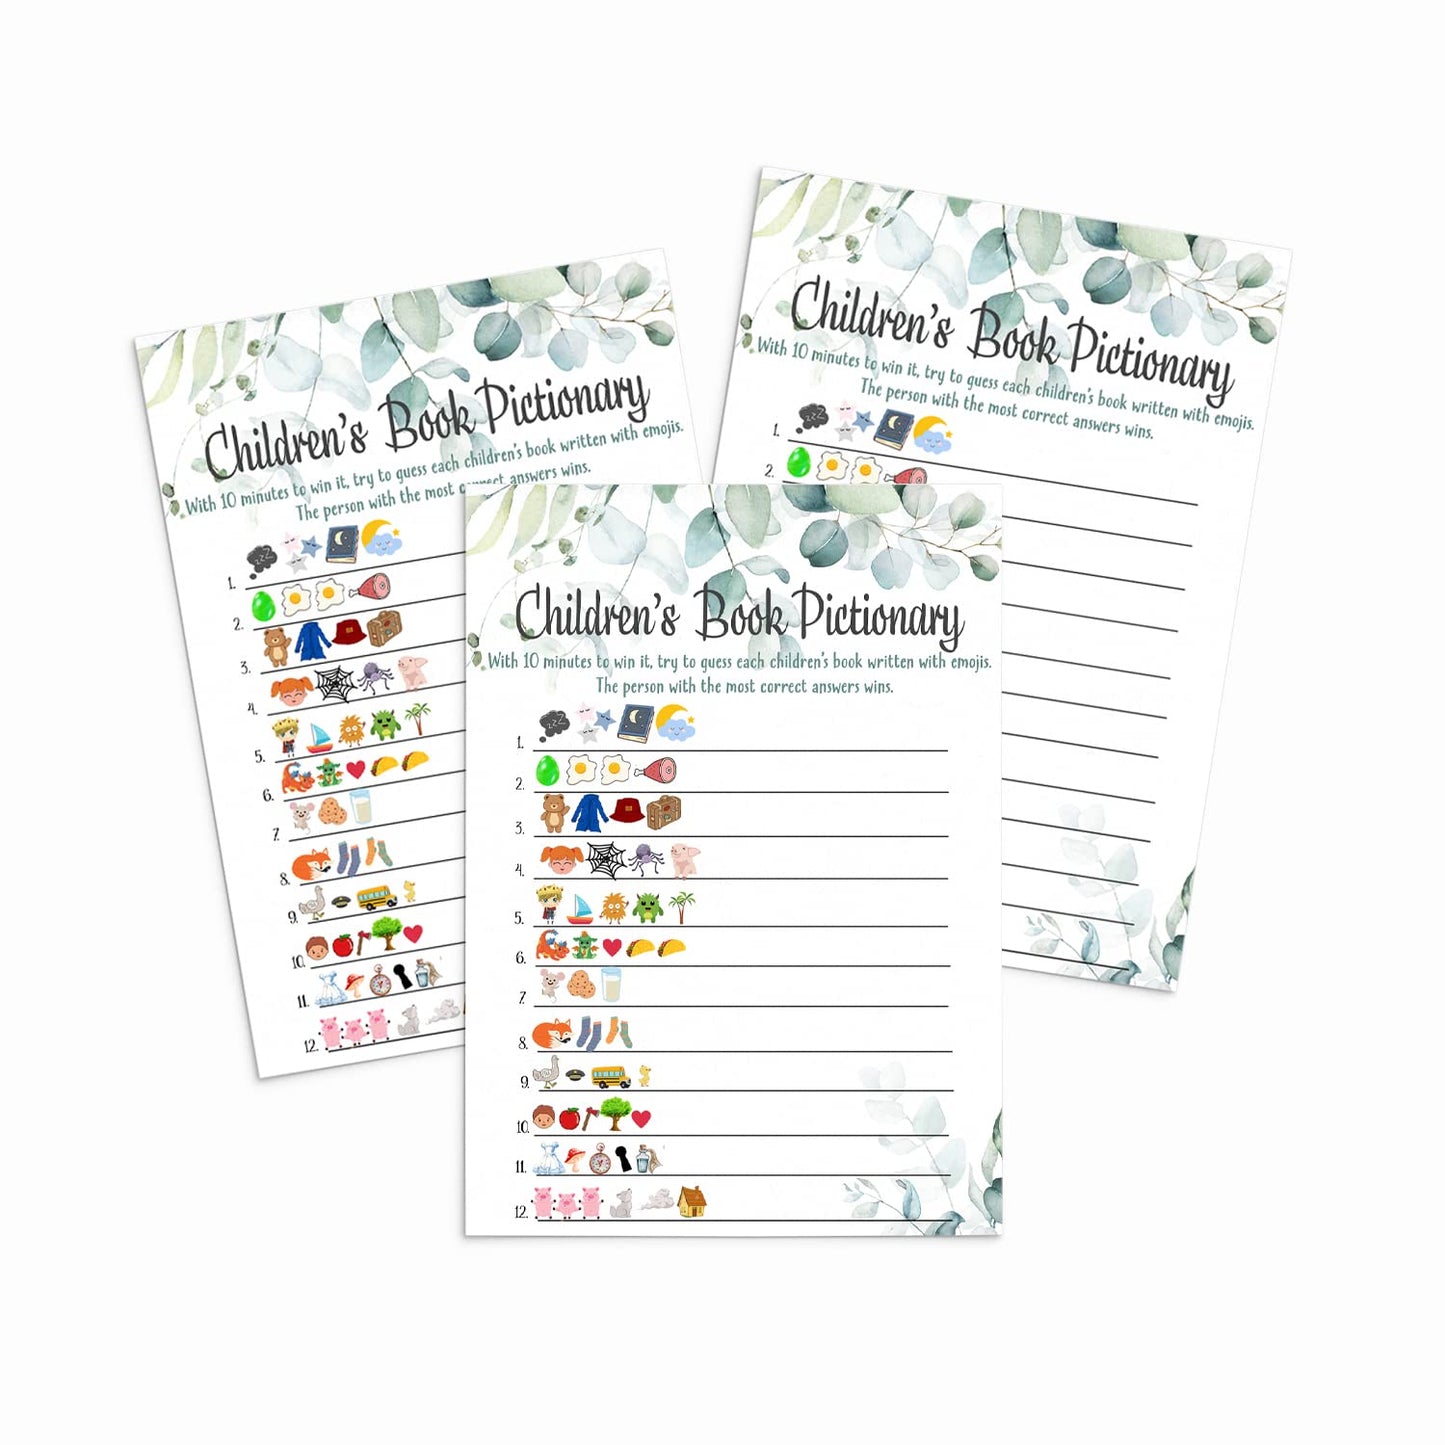 Paper Clever Party Greenery Baby Shower Emoji Pictionary Game - Rustic Floral Eucalyptus DesignPaper Clever Party